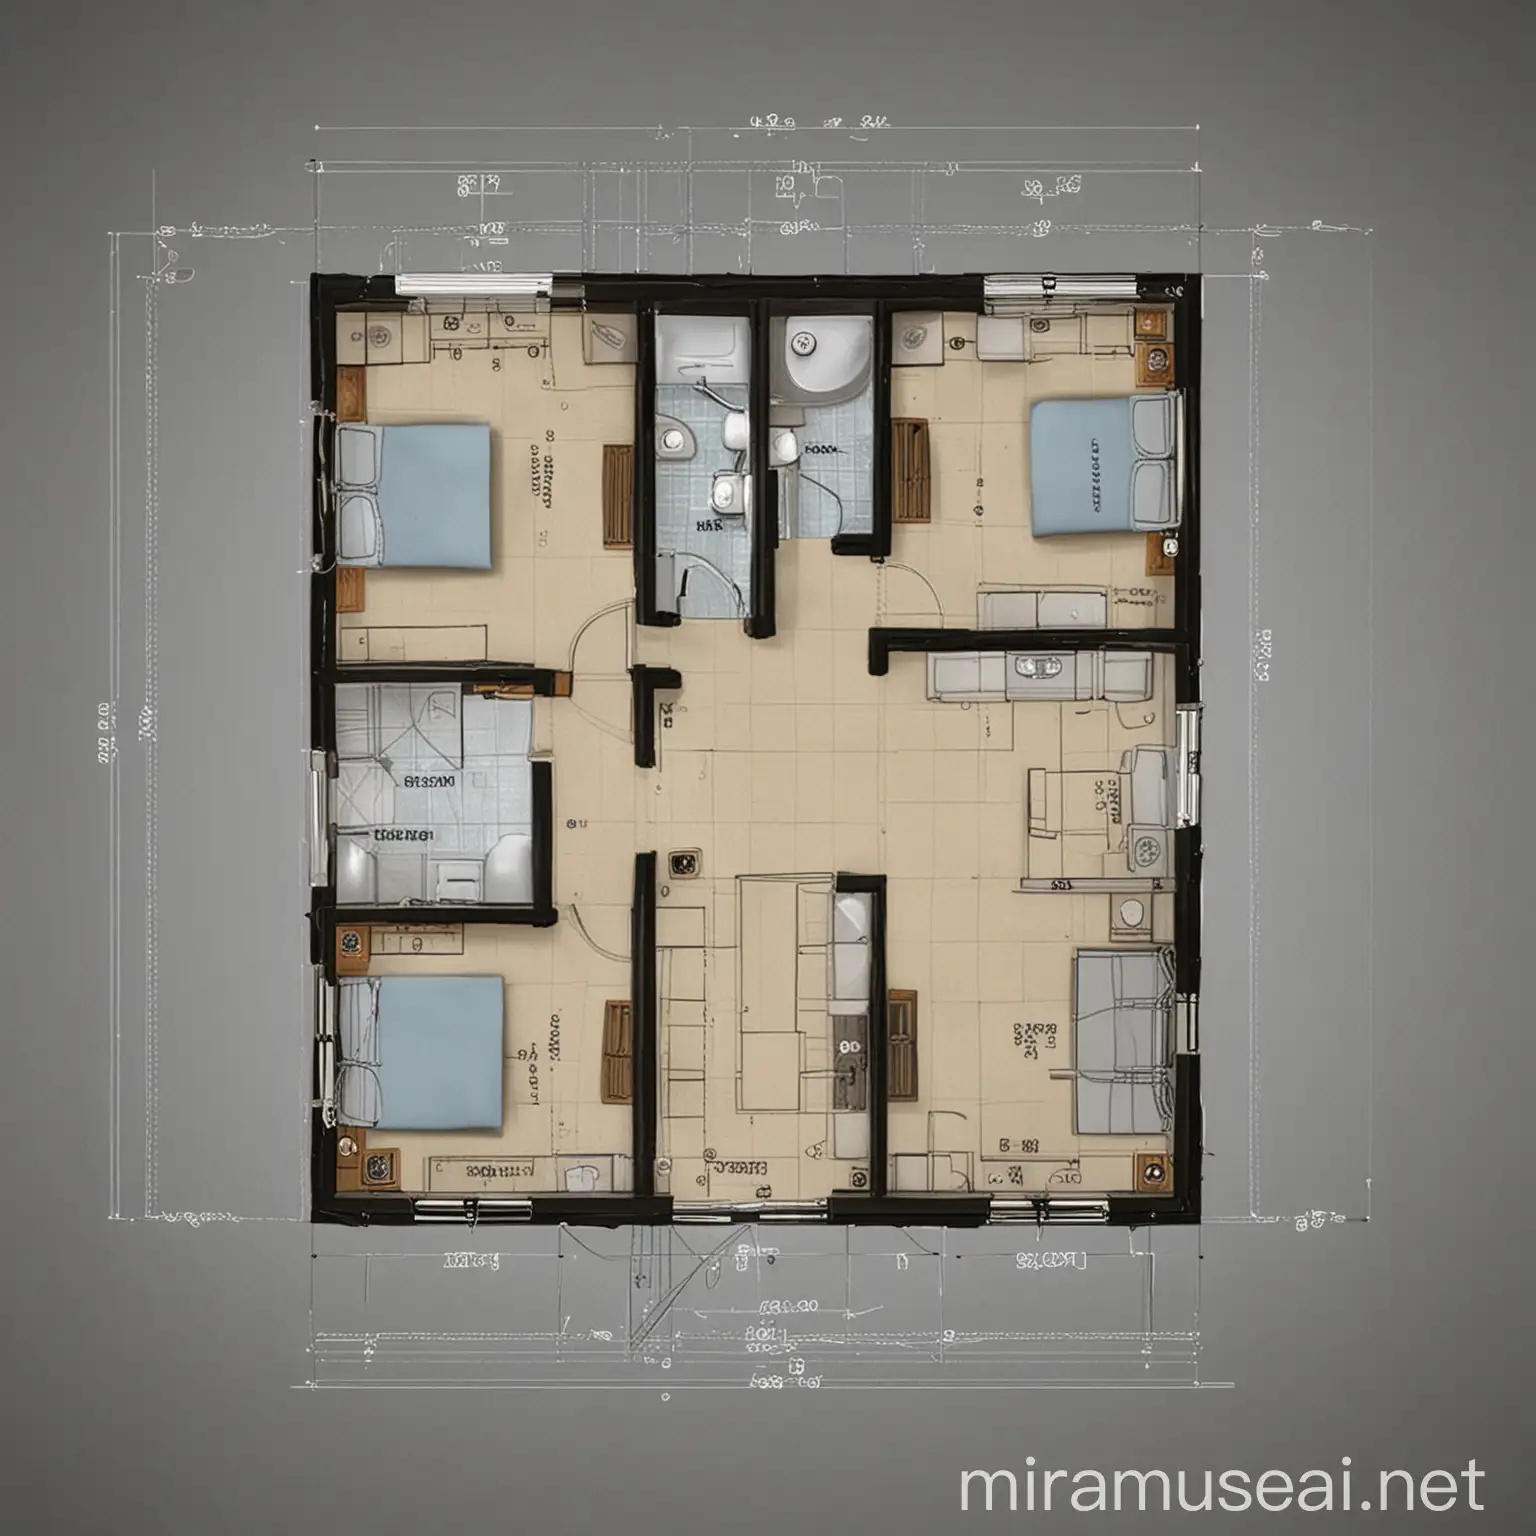 sweep design of the whole house. 2 bedrooms, living room, toilet, bathroom. AutoCAD drawing